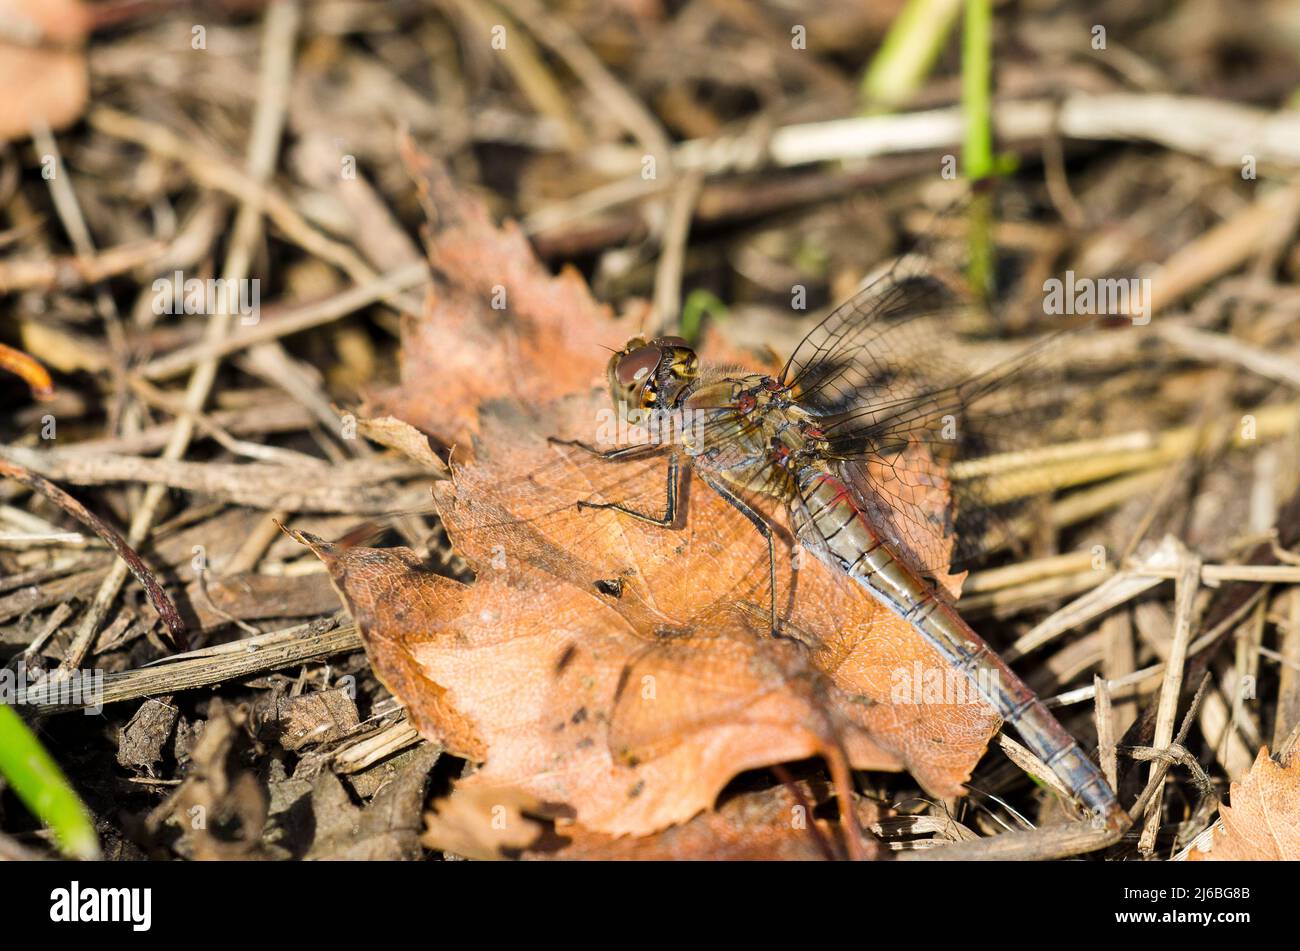 The common darter (Sympetrum striolatum) is a dragonfly of the family Libellulidae native to Eurasia. Stock Photo